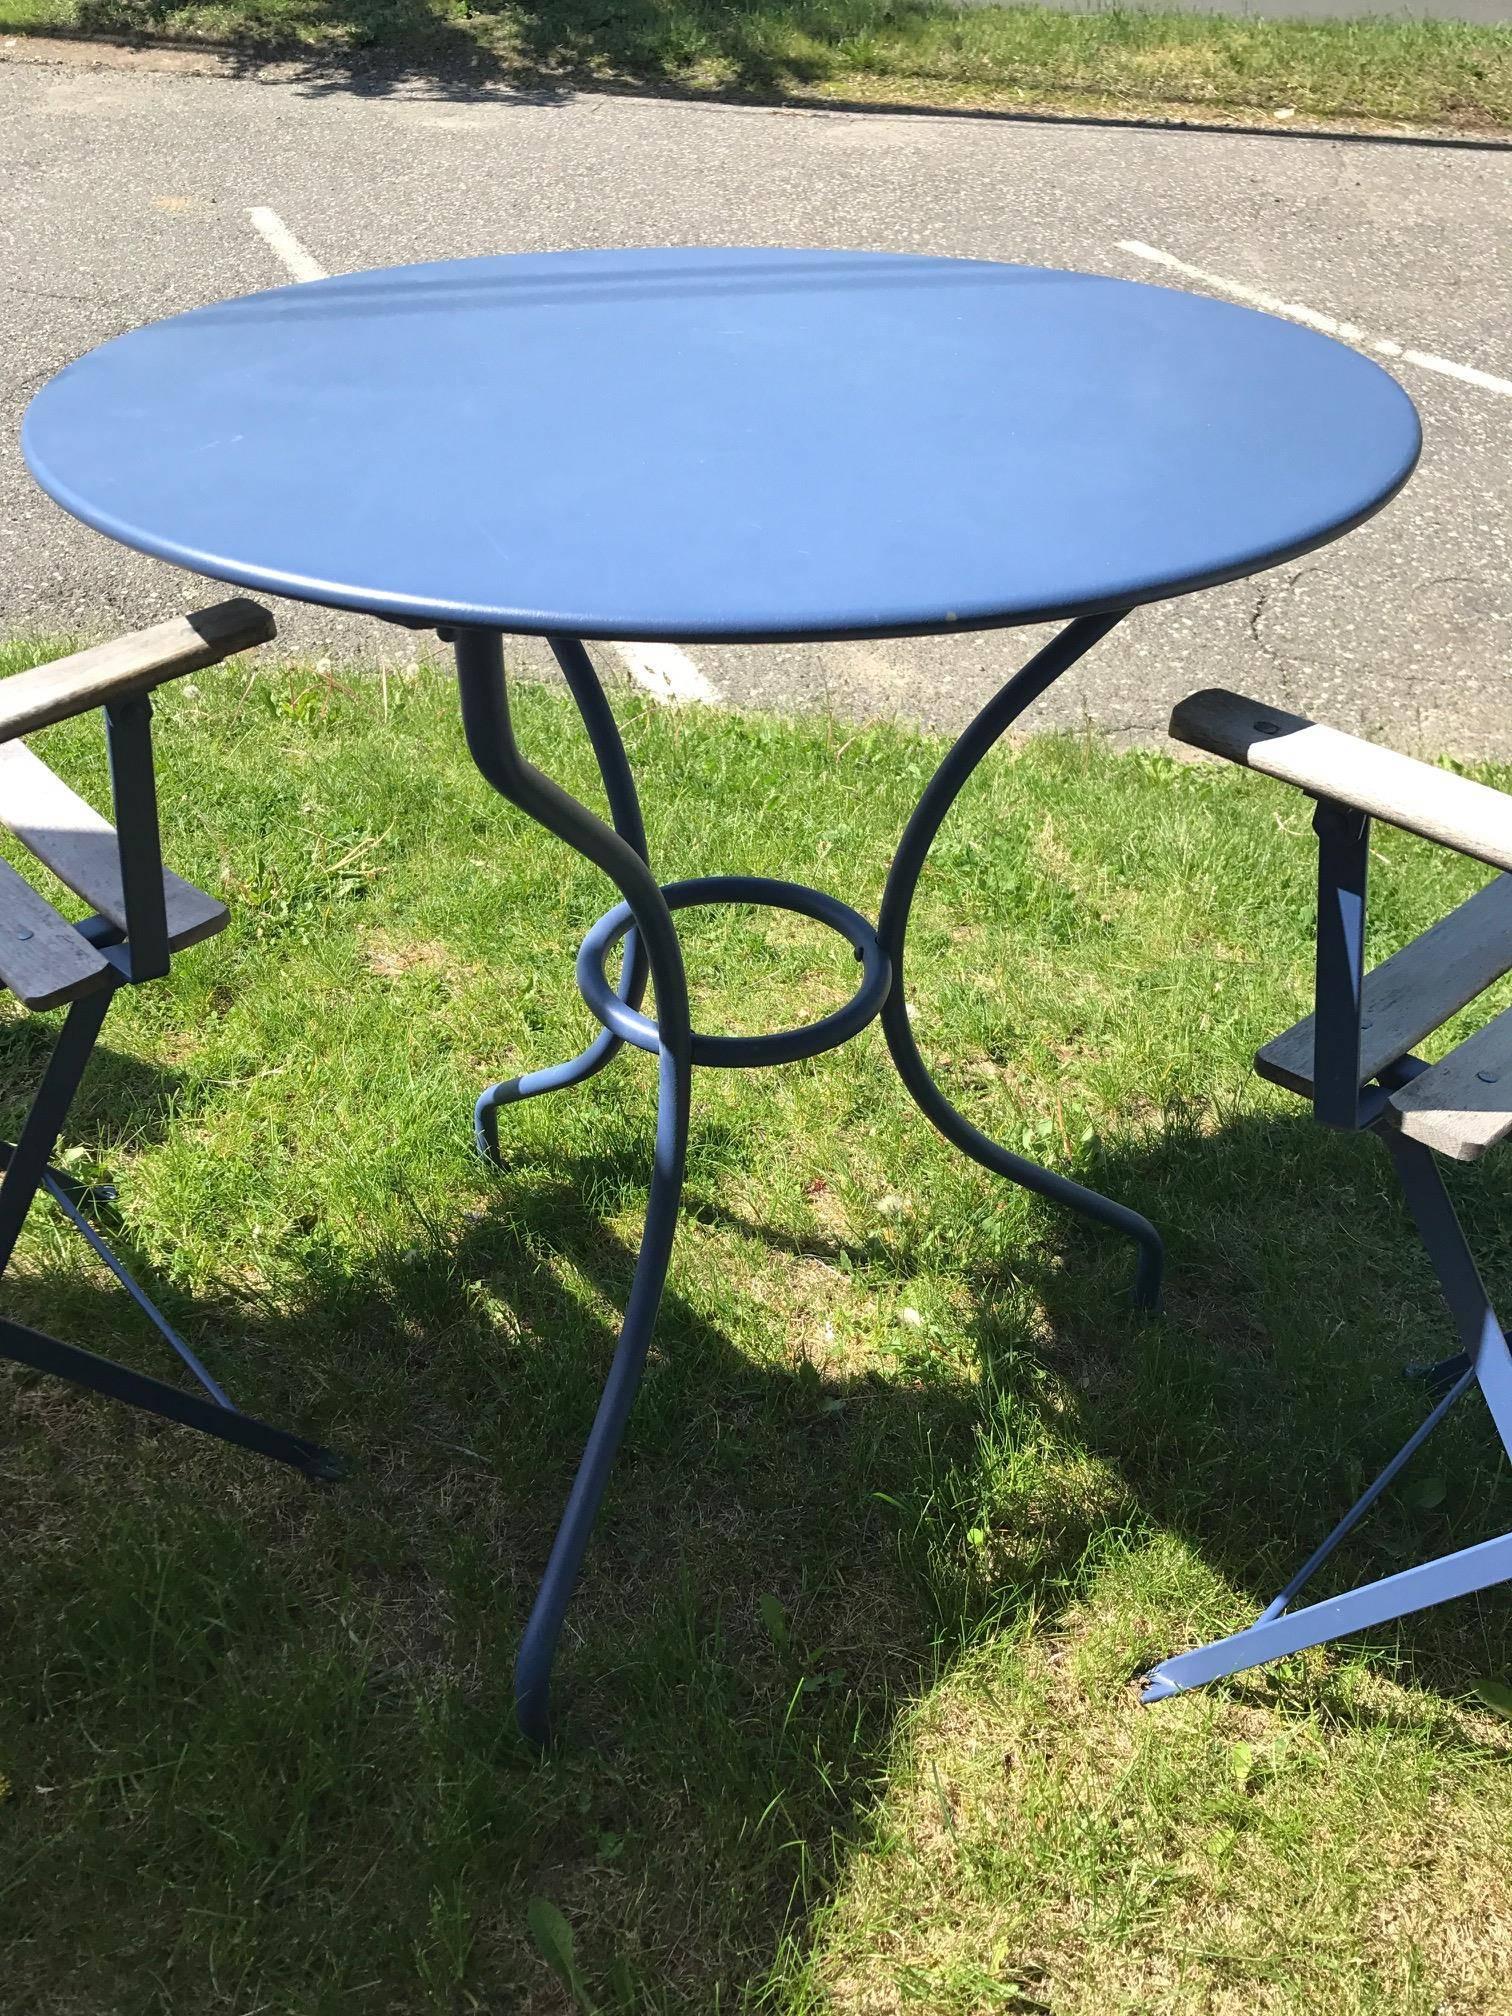 Jardin du Luxembourg in Paris Outdoor French Made Fermob bistro royal blue fabulously made and designed. This is a wonderful set like new. Wooden slat folding chairs with aluminum perimeter's painted a great royal blue. Tabletop of aluminium and